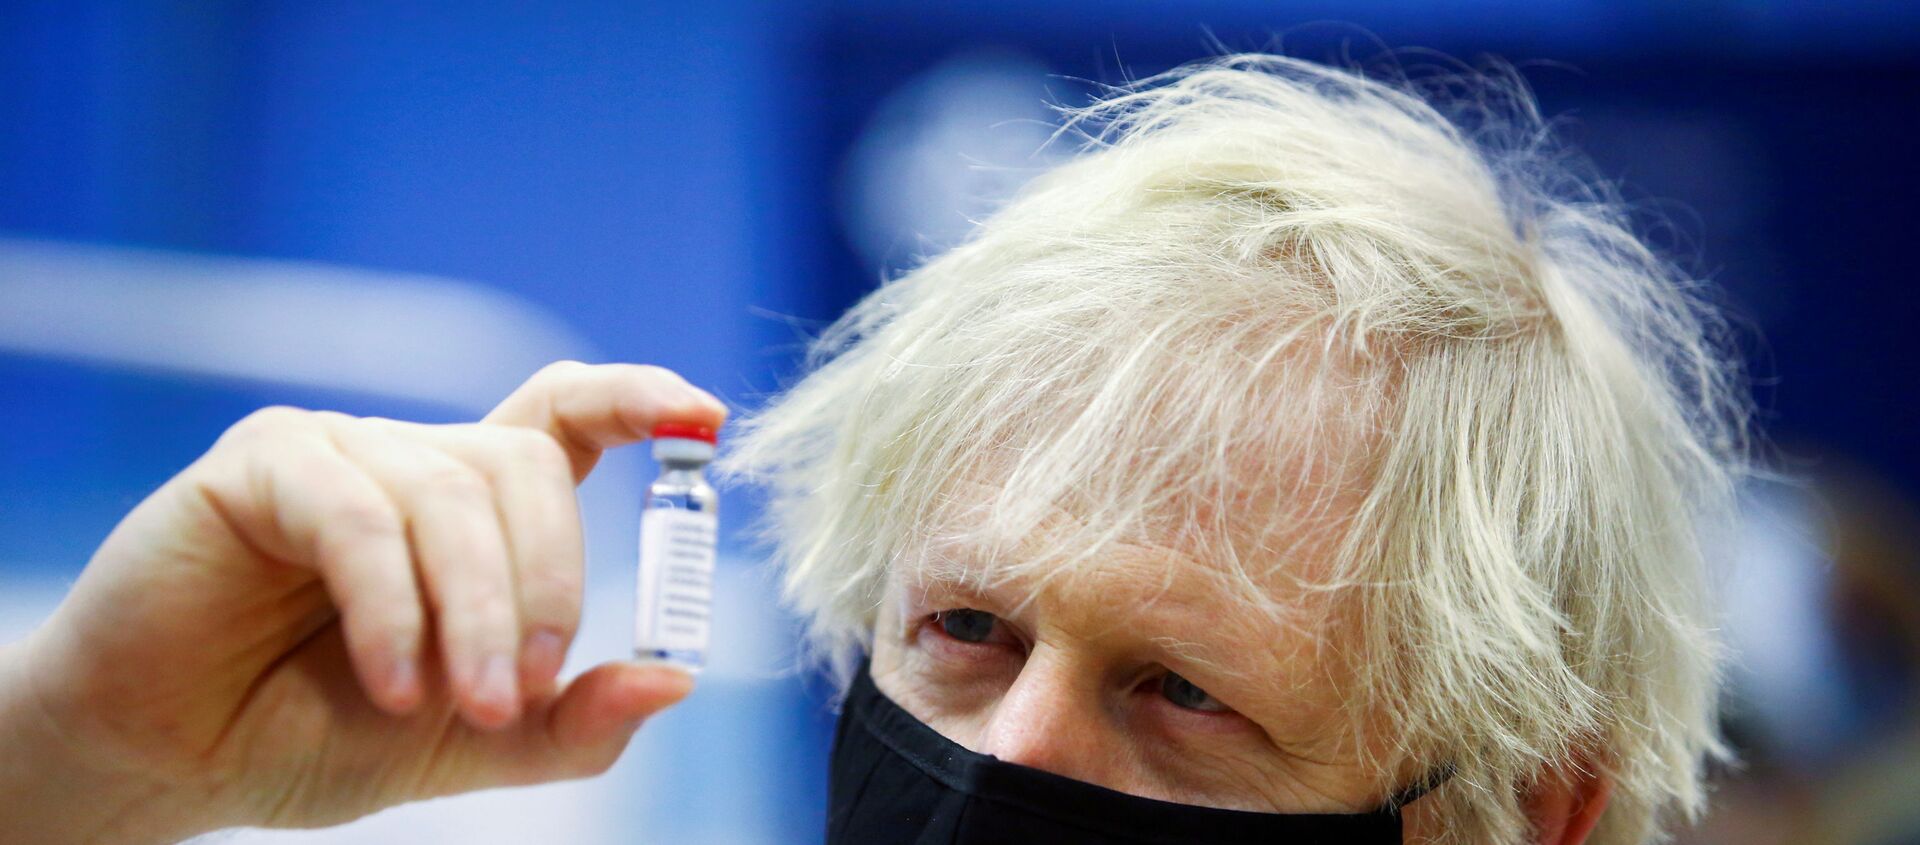 FILE PHOTO: Britain's Prime Minister Boris Johnson holds a vial of an Oxford-AstraZeneca COVID-19 vaccine, during his visit at a vaccination centre at Cwmbran Stadium in Cwmbran, south Wales, Britain February 17, 2021. Geoff Caddick/Pool via REUTERS/File Photo - Sputnik International, 1920